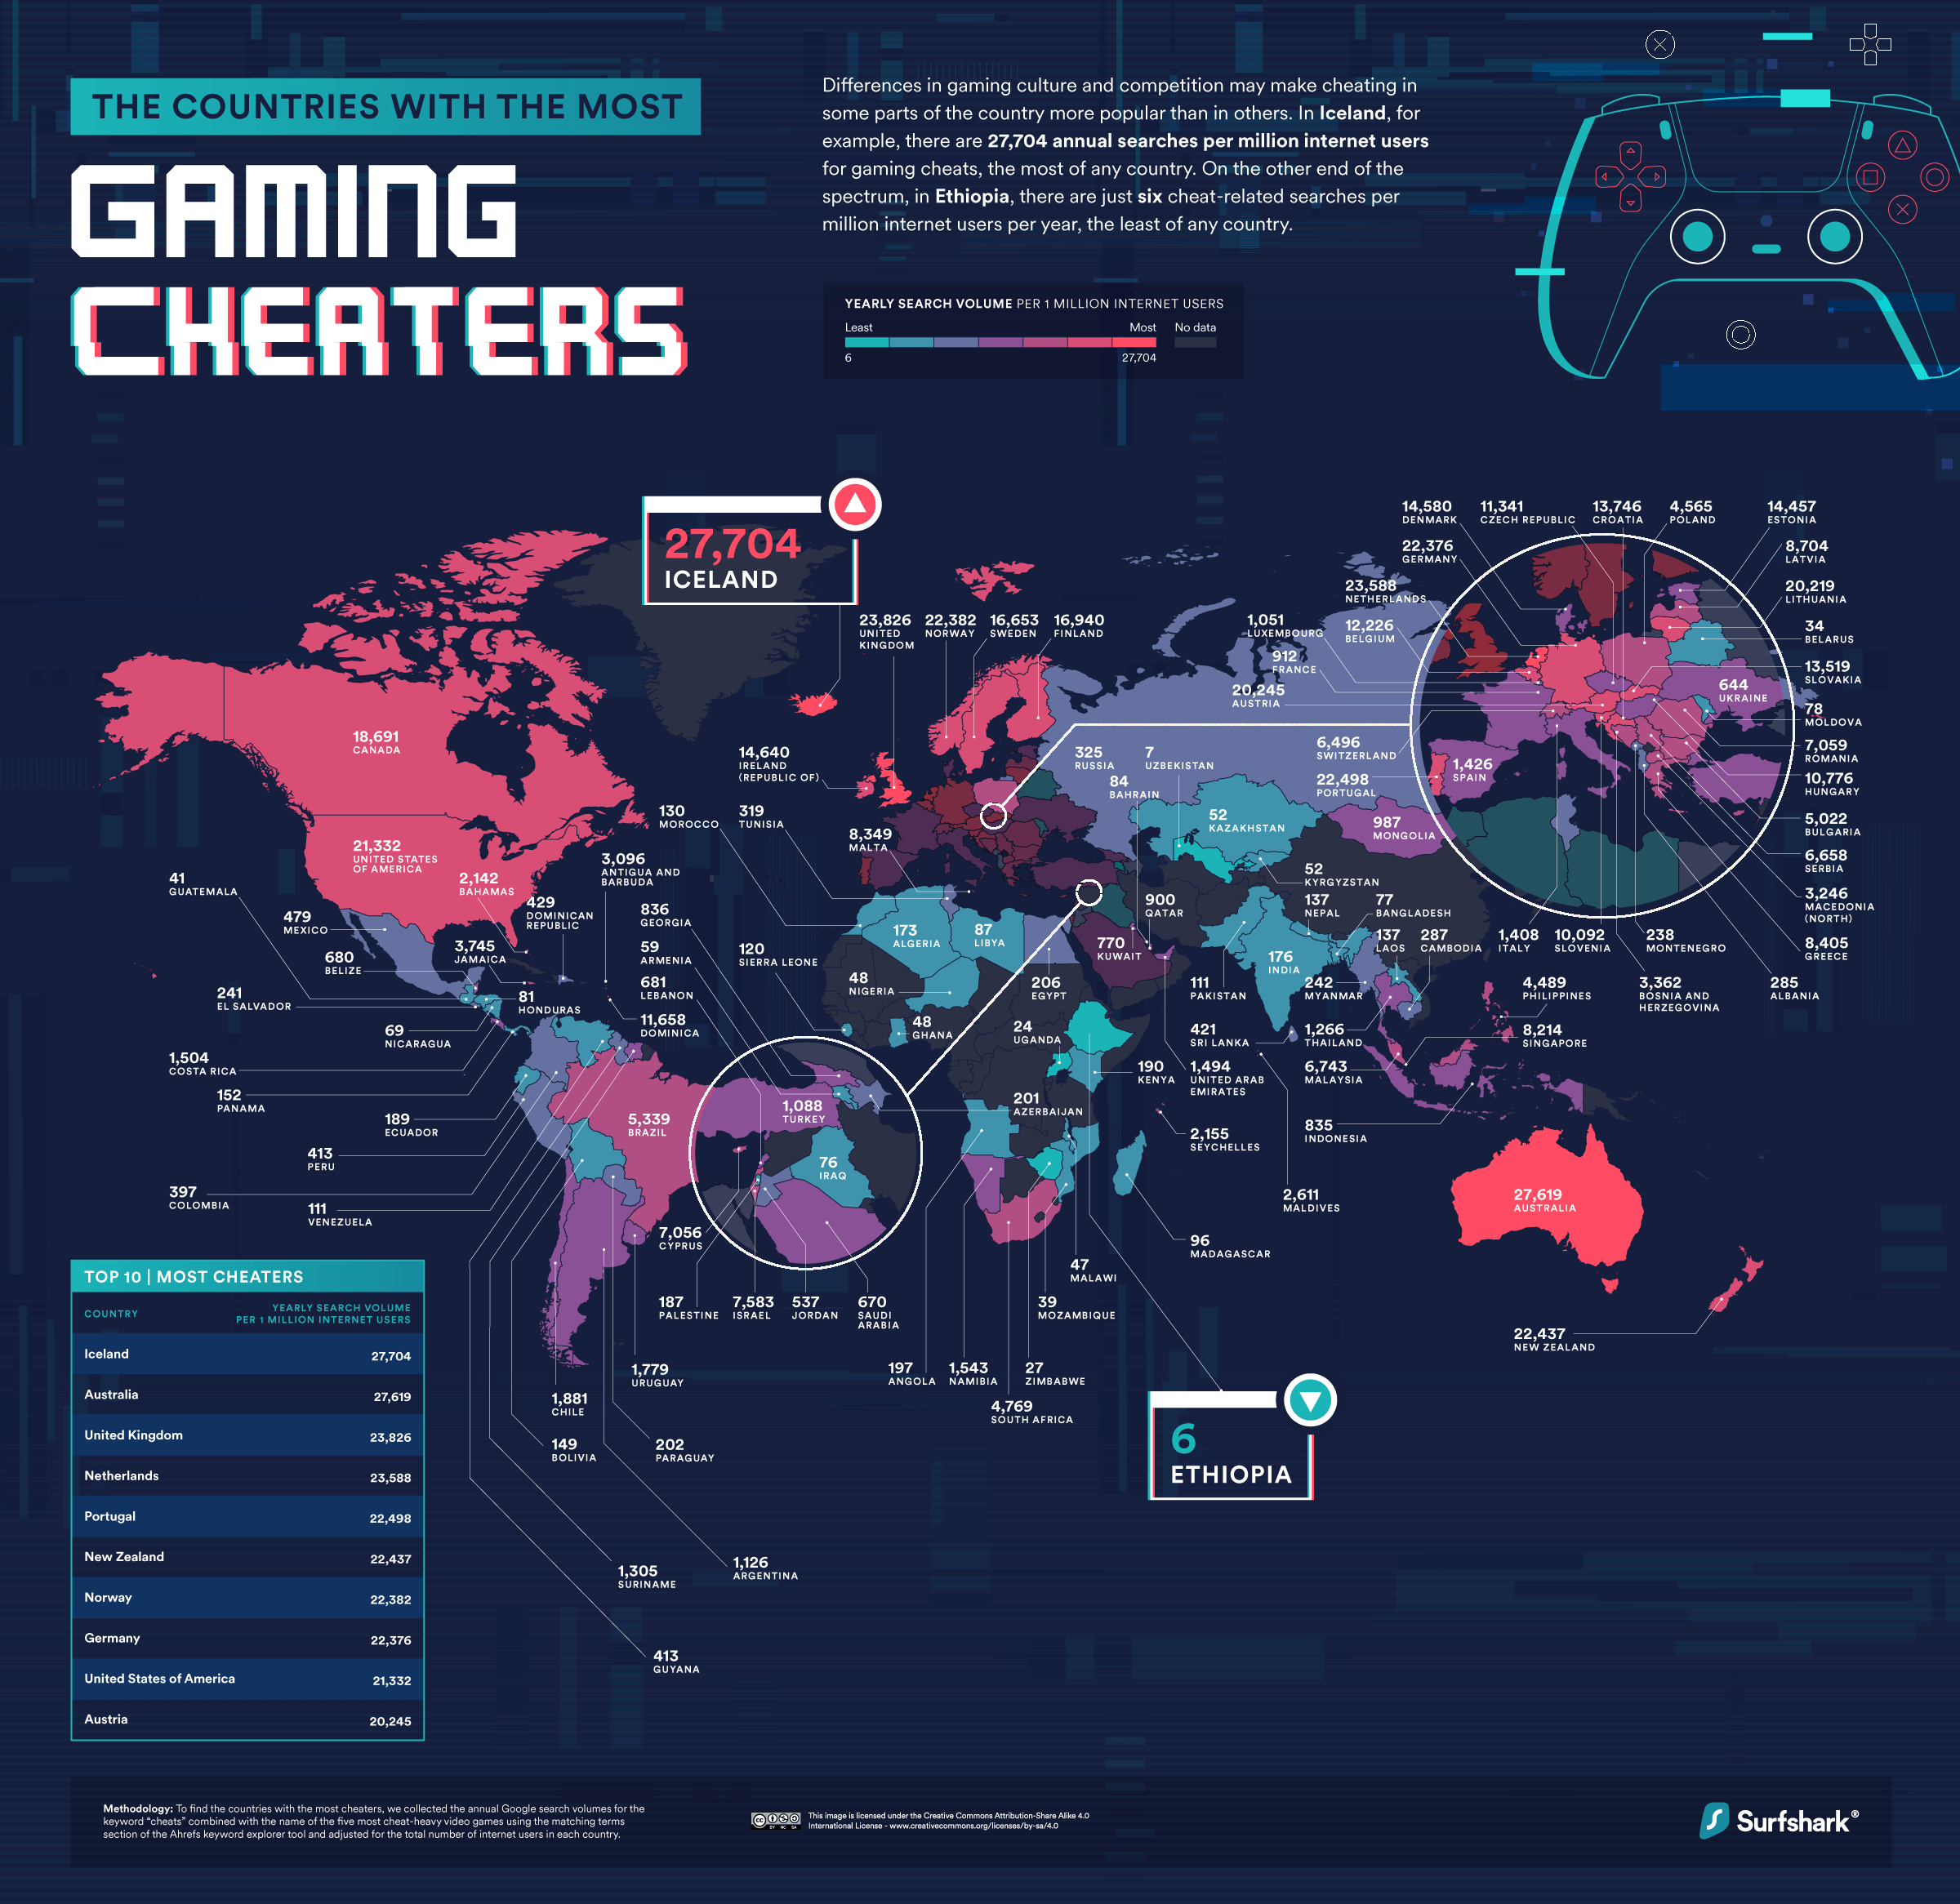 Cheating games - which online games have the most cheaters? - Surfshark